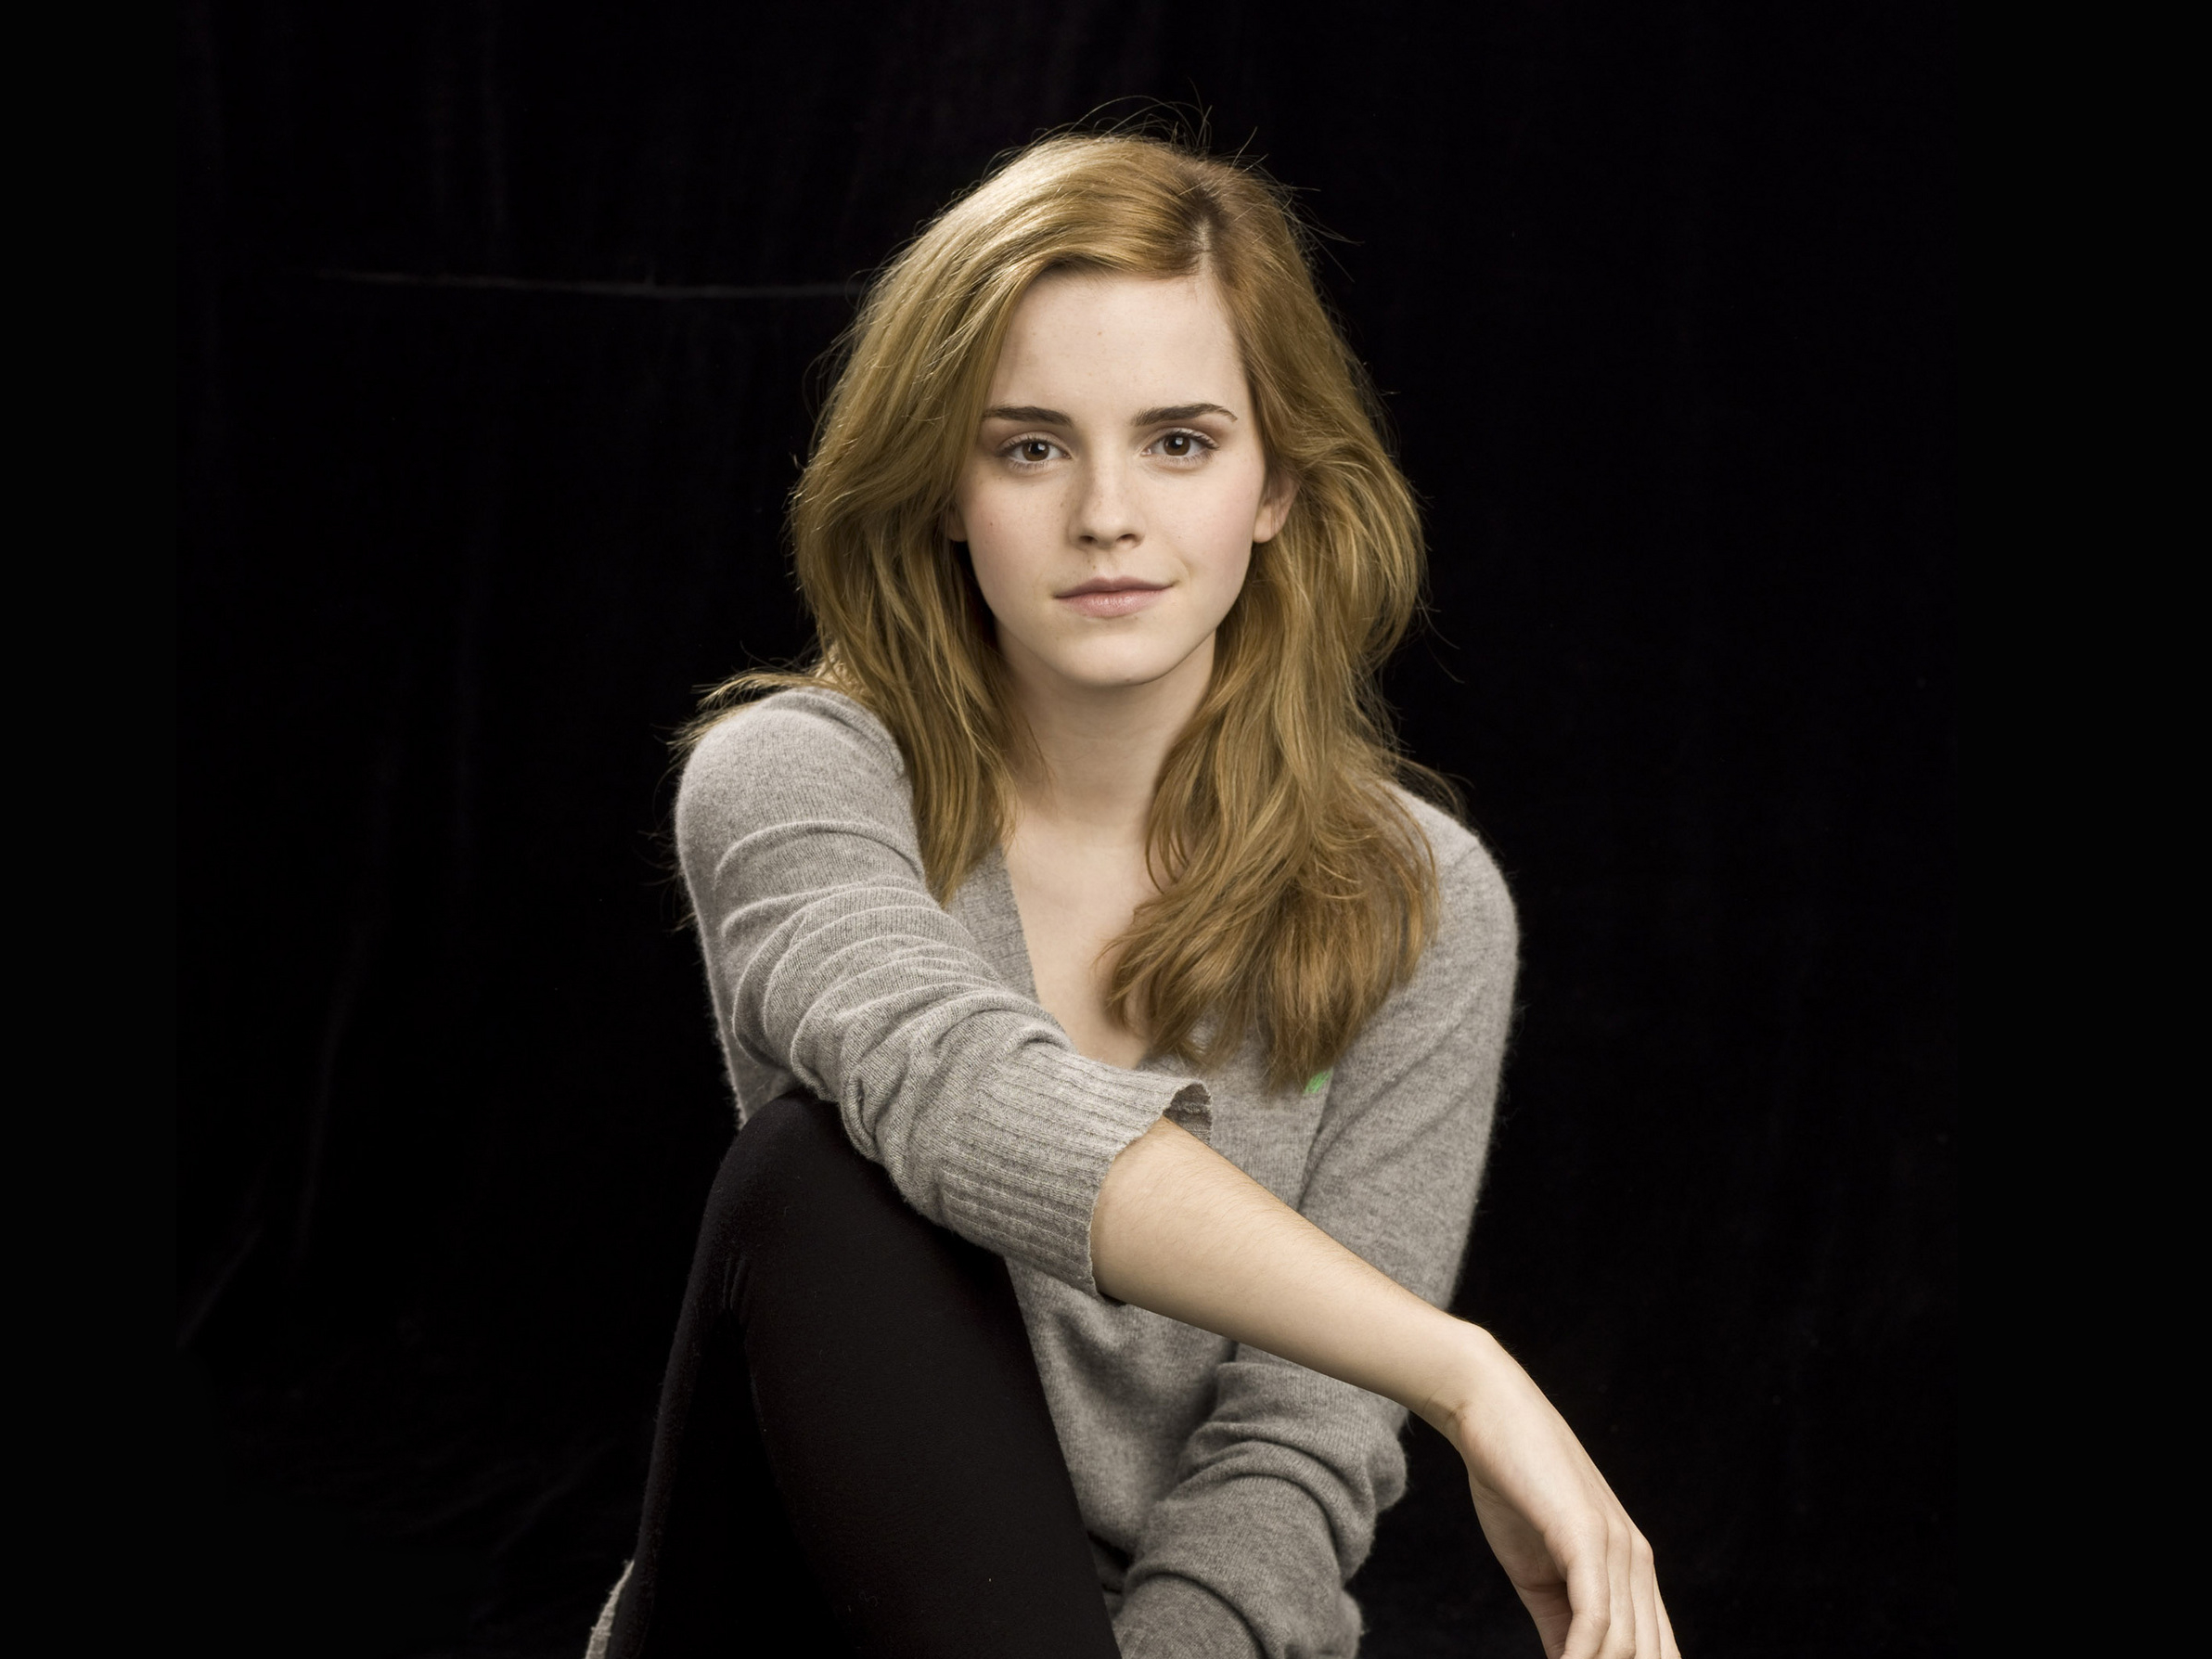 470+ Emma Watson HD Wallpapers and Backgrounds